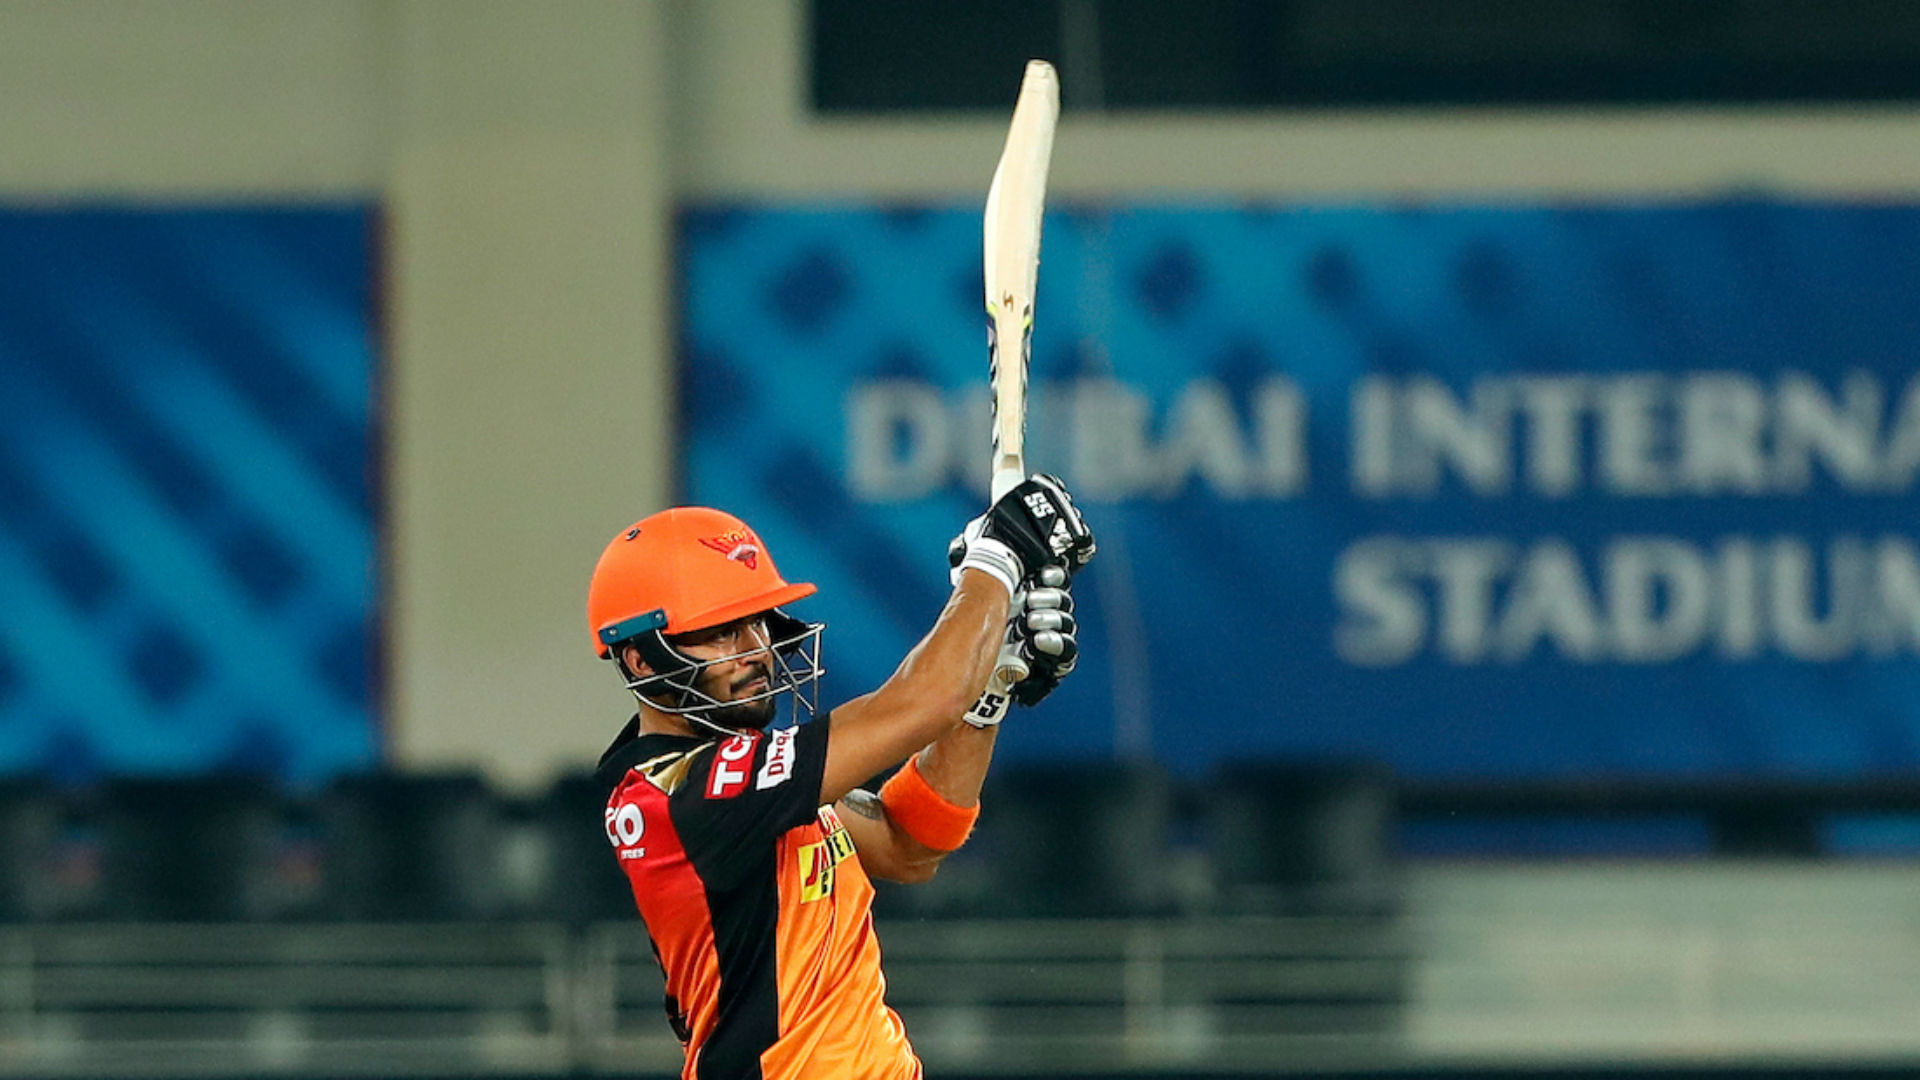 Sunrisers Hyderabad recovered from an early Jofra Archer burst to beat Rajasthan Royals, with Manish Pandey cutting loose.